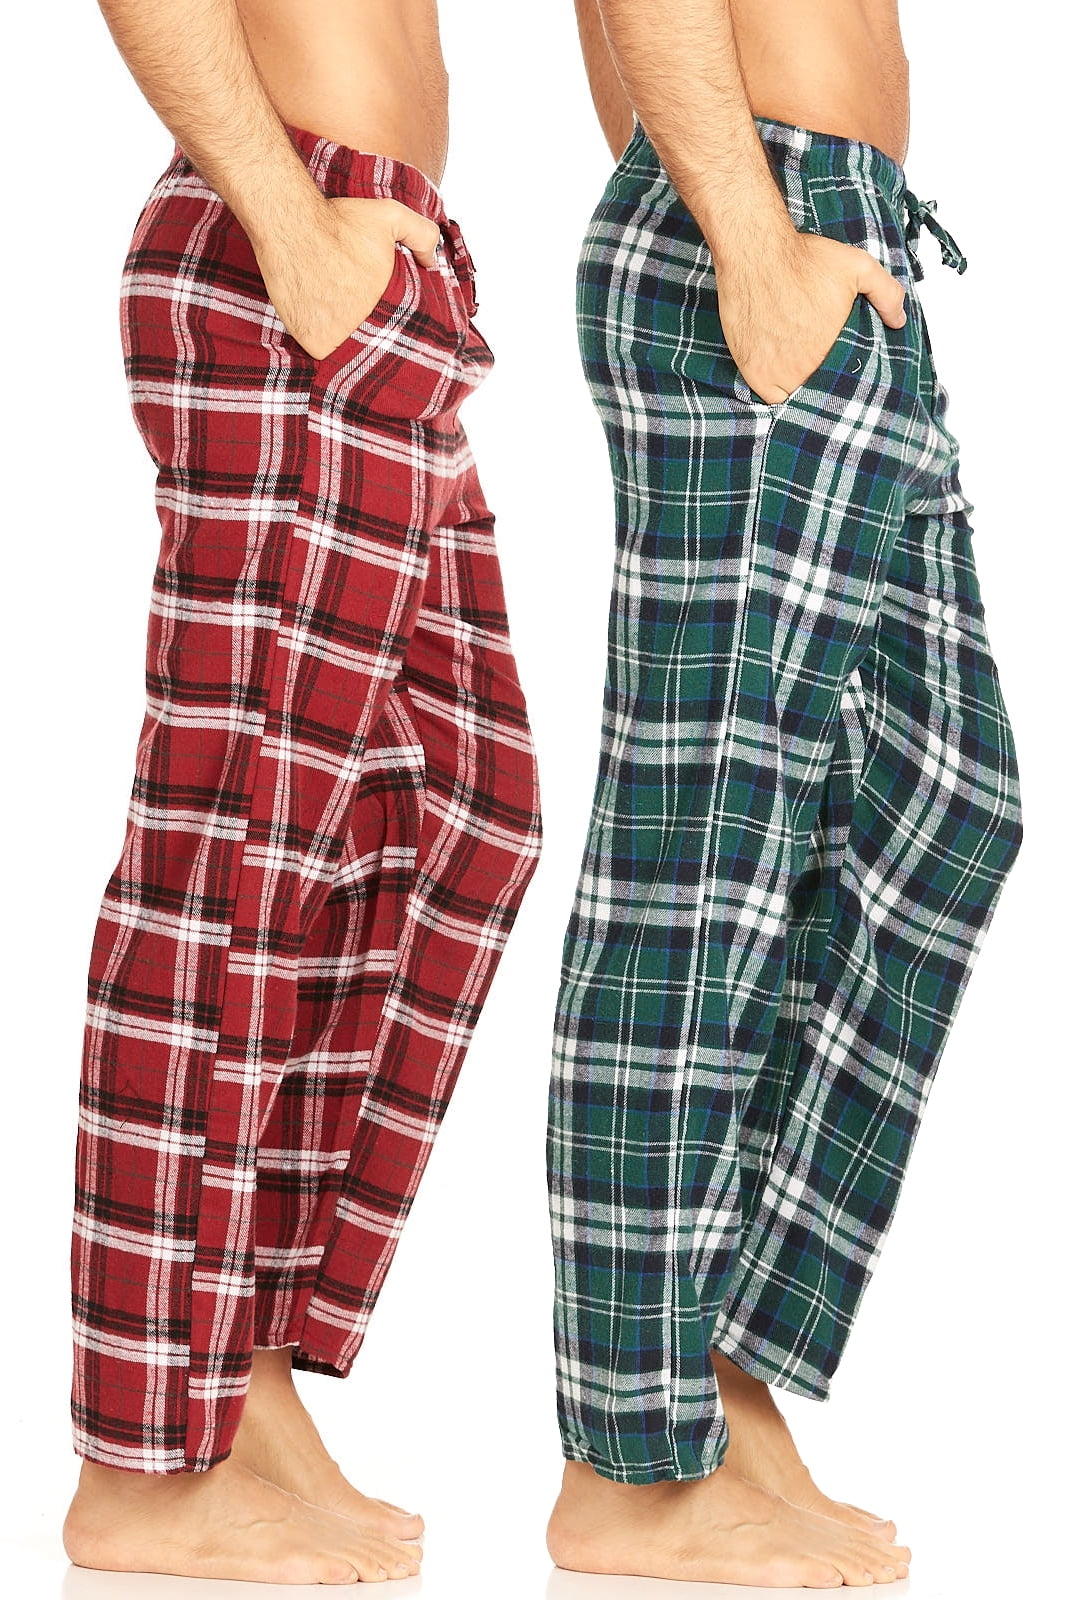 Smeiling Mens Homewear Winter Flannel Solid Thicken Long Pants Pajamas Set